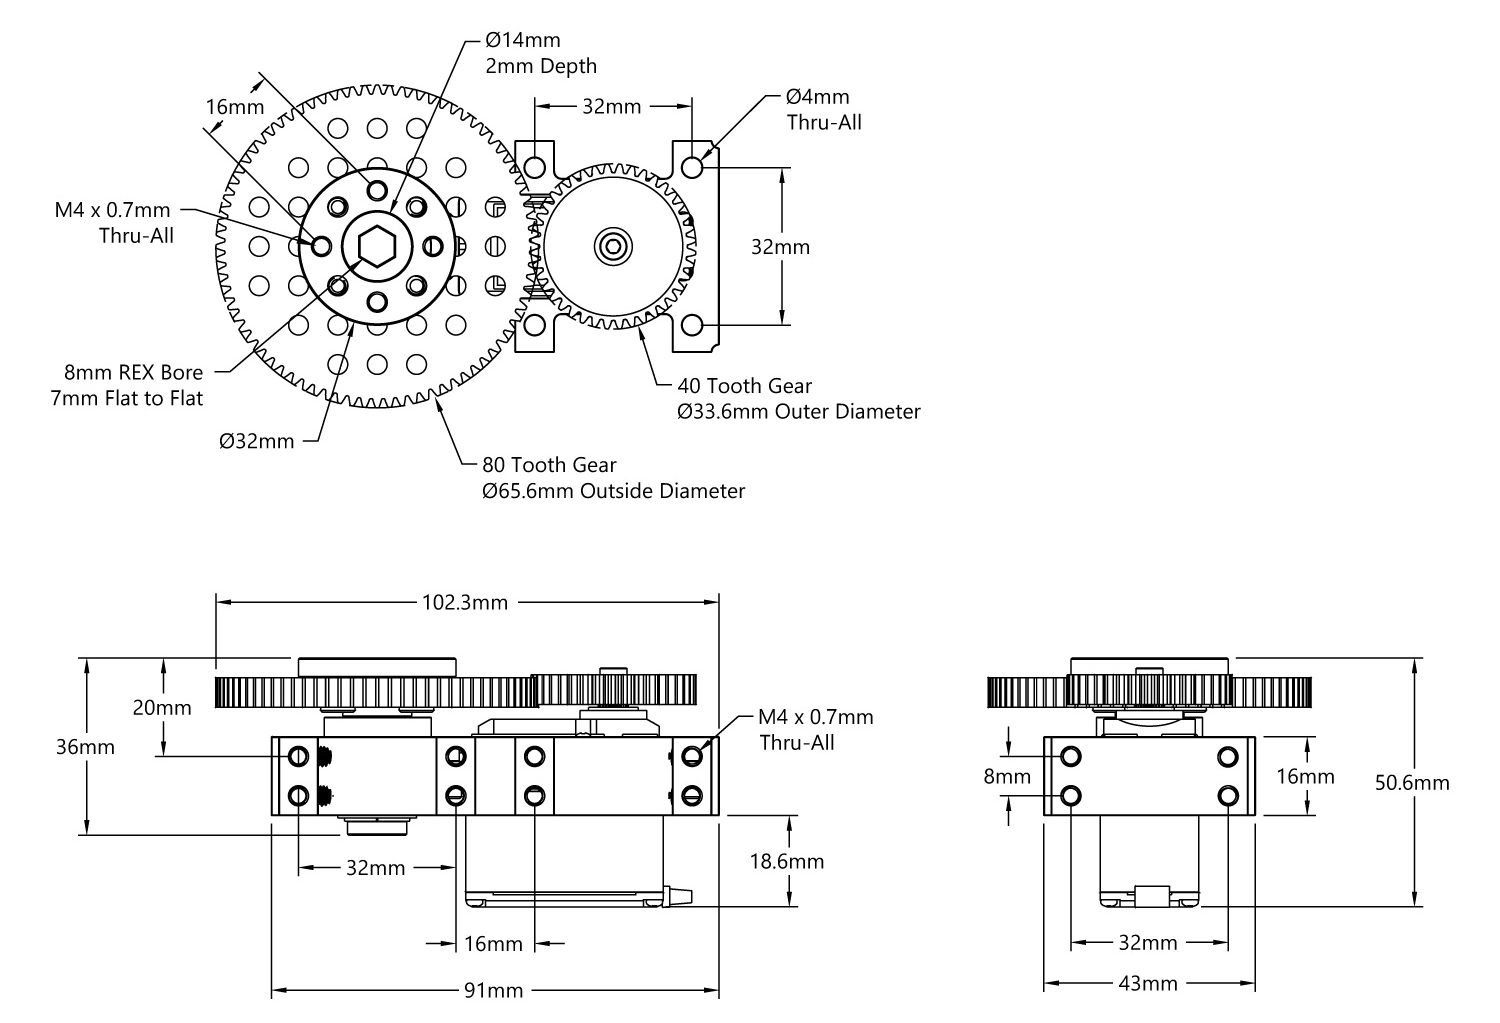 Shark-2 Servo Gearbox (0.28 sec/60°, 36 RPM, 944 oz-in Torque, 1260° Rotation) - Click to Enlarge